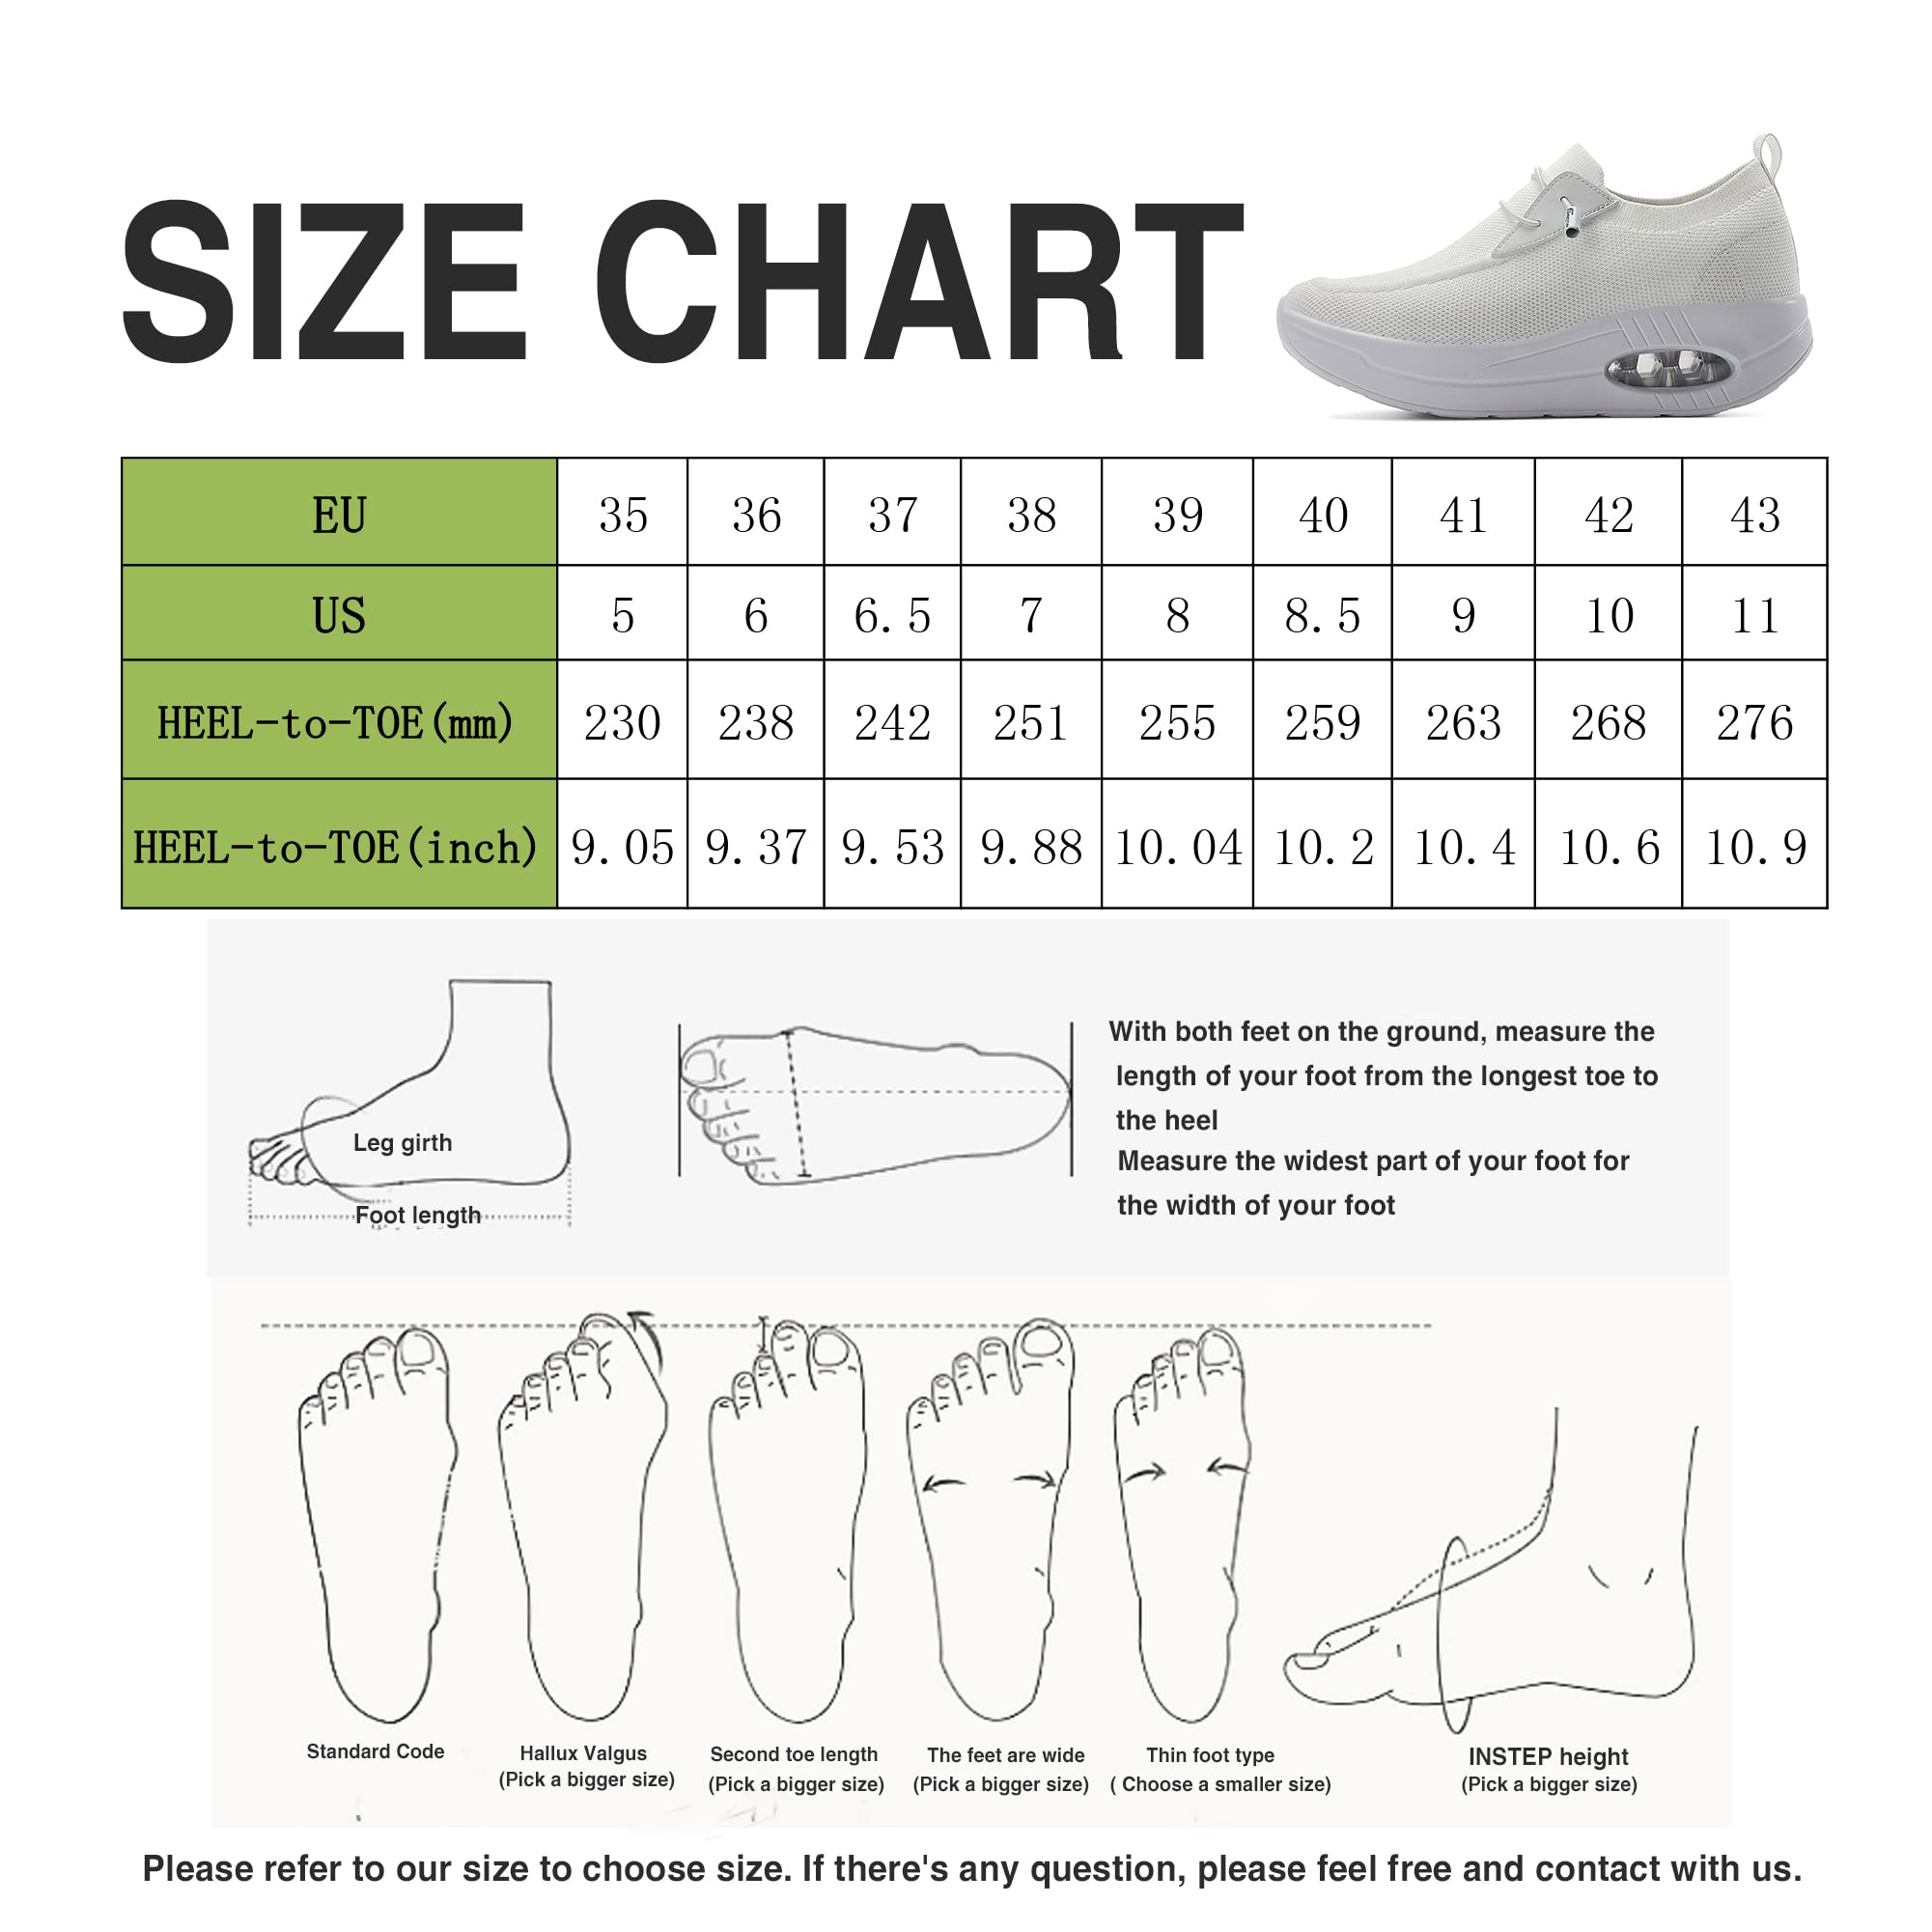 AUUGK White Women's Slip-on Walking Shoes Mesh Breathe Air Cushion Arch Support Sock Sneakers for Women Ladys Girls Fashion Platform Lightweight Loafers Non-Slip Nursing Work Running Shoes Size11